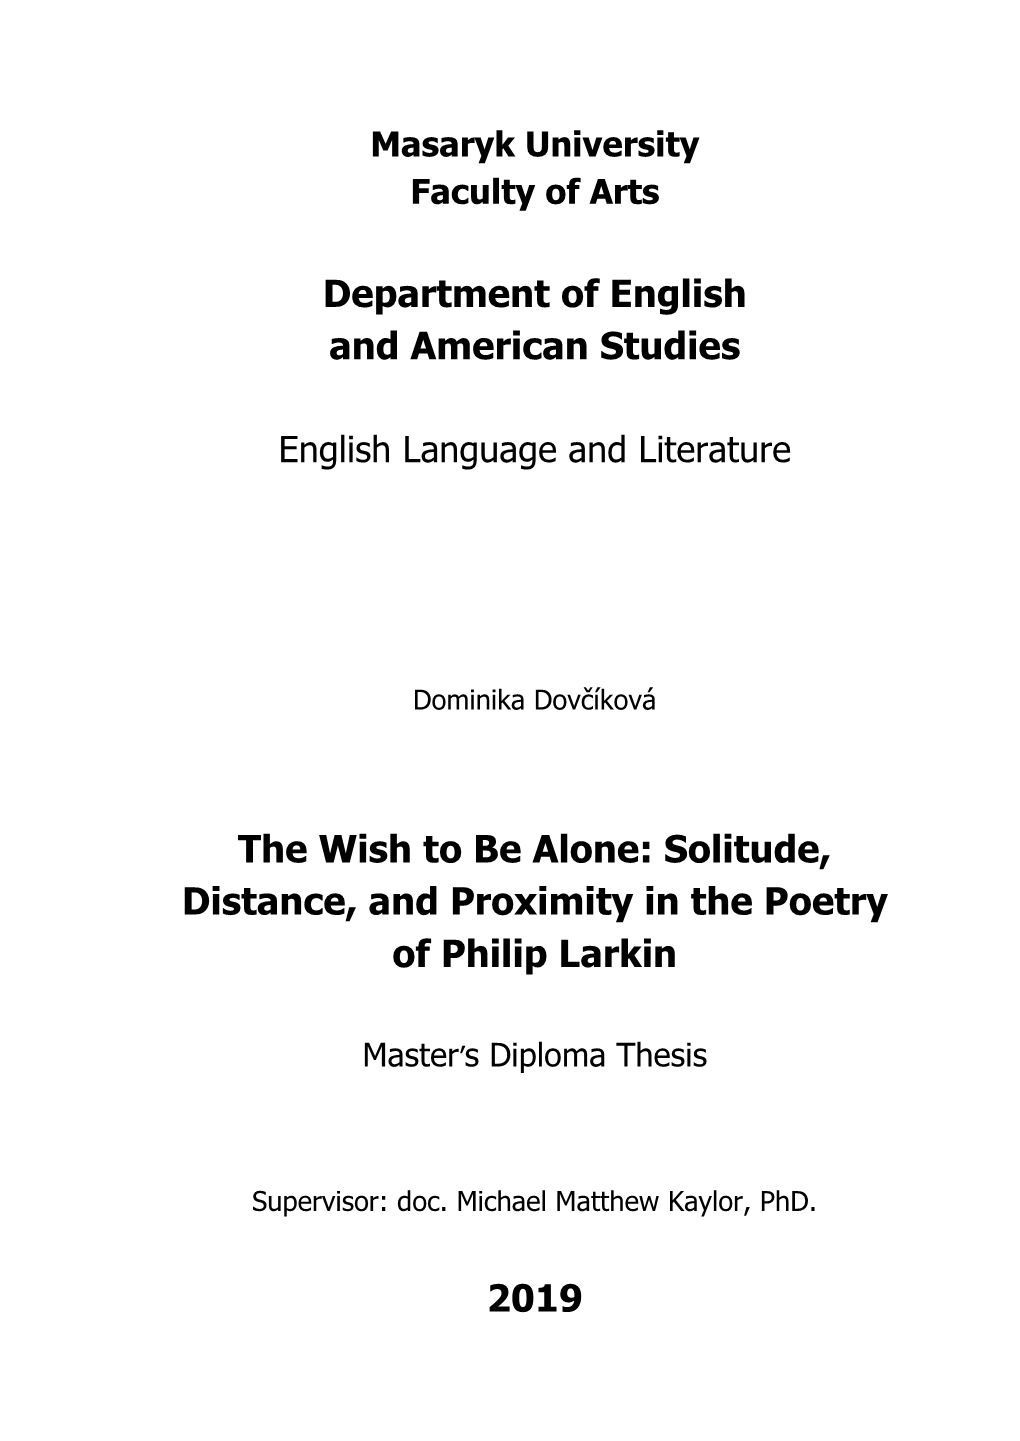 Solitude, Distance, and Proximity in the Poetry of Philip Larkin